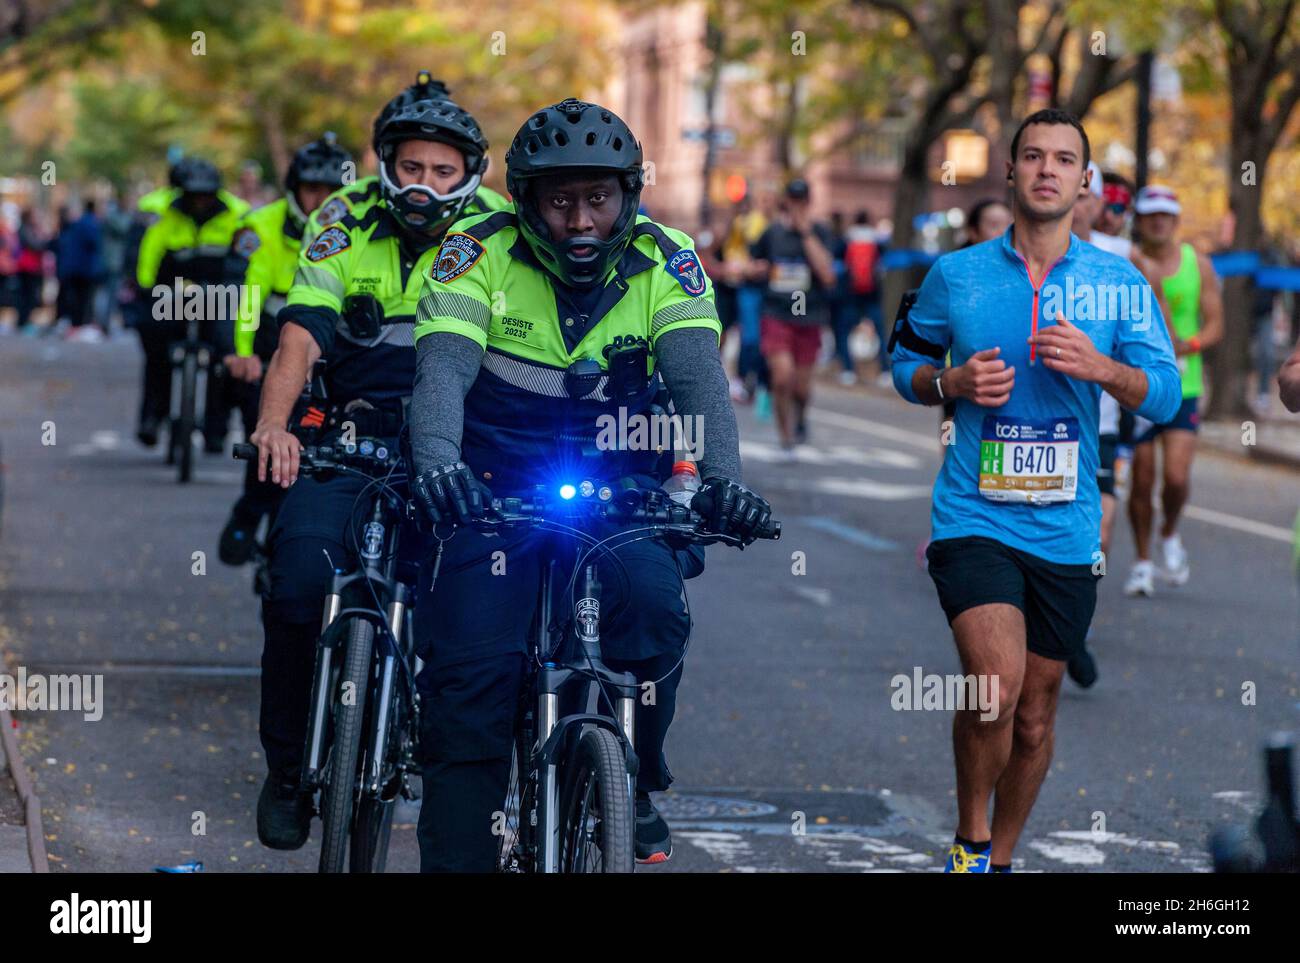 A phalanx of NYPD officers on bicycles in Harlem in New York near the 22 mile mark near Mount Morris Park on Sunday, November 7, 2019 in the 50th running of the TCS New York City Marathon. About 30,000 runners. down from the usual 50,000, participated in the race which was cancelled last year due to the pandemic.  (© Richard B. Levine) Stock Photo